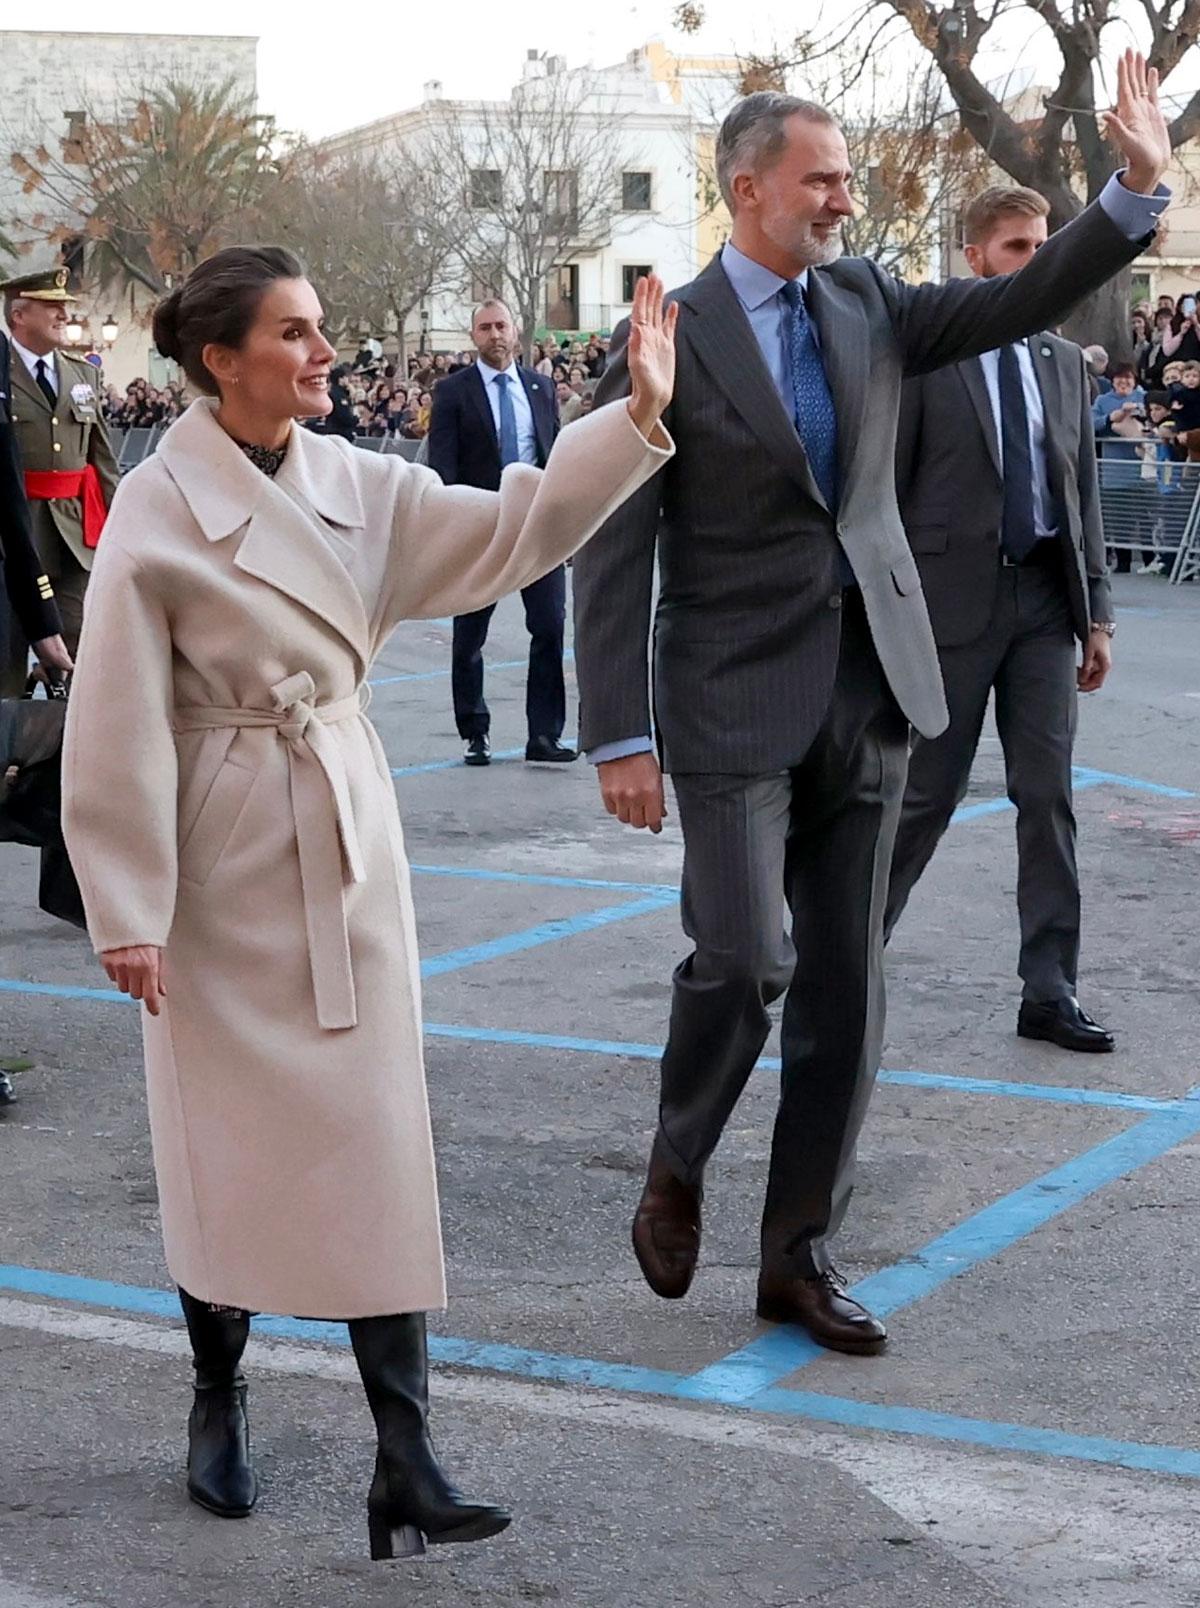 The King and Queen of Spain in Menorca.